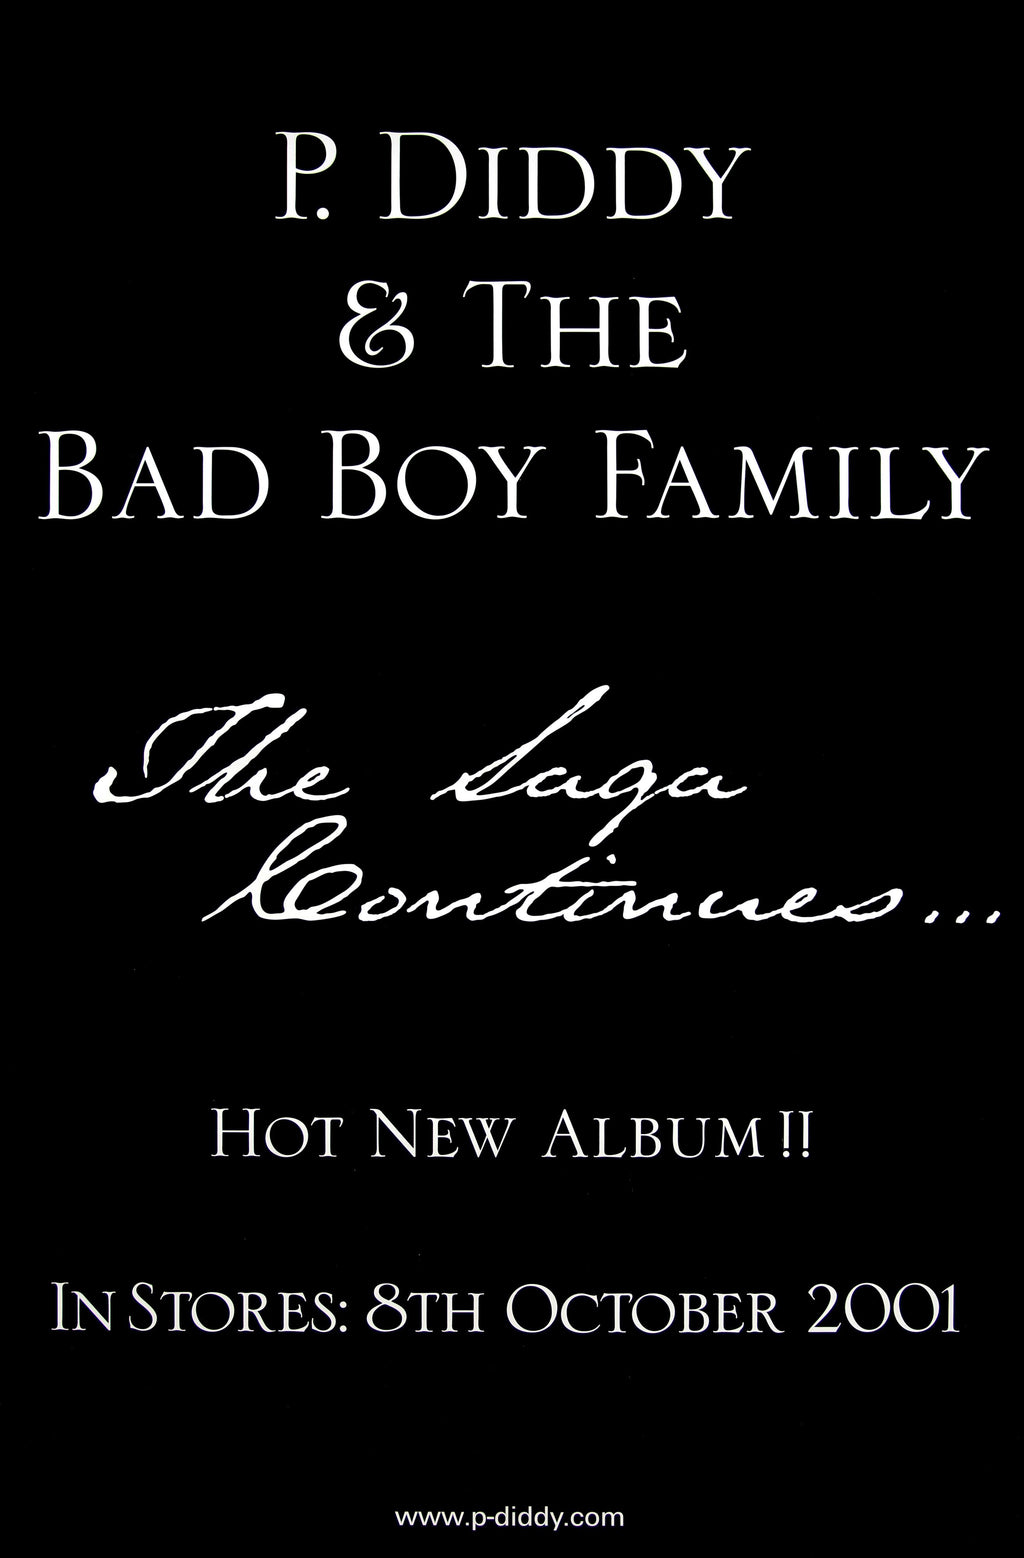 P. Diddy & the Bad Boy Family poster - The Saga Continues